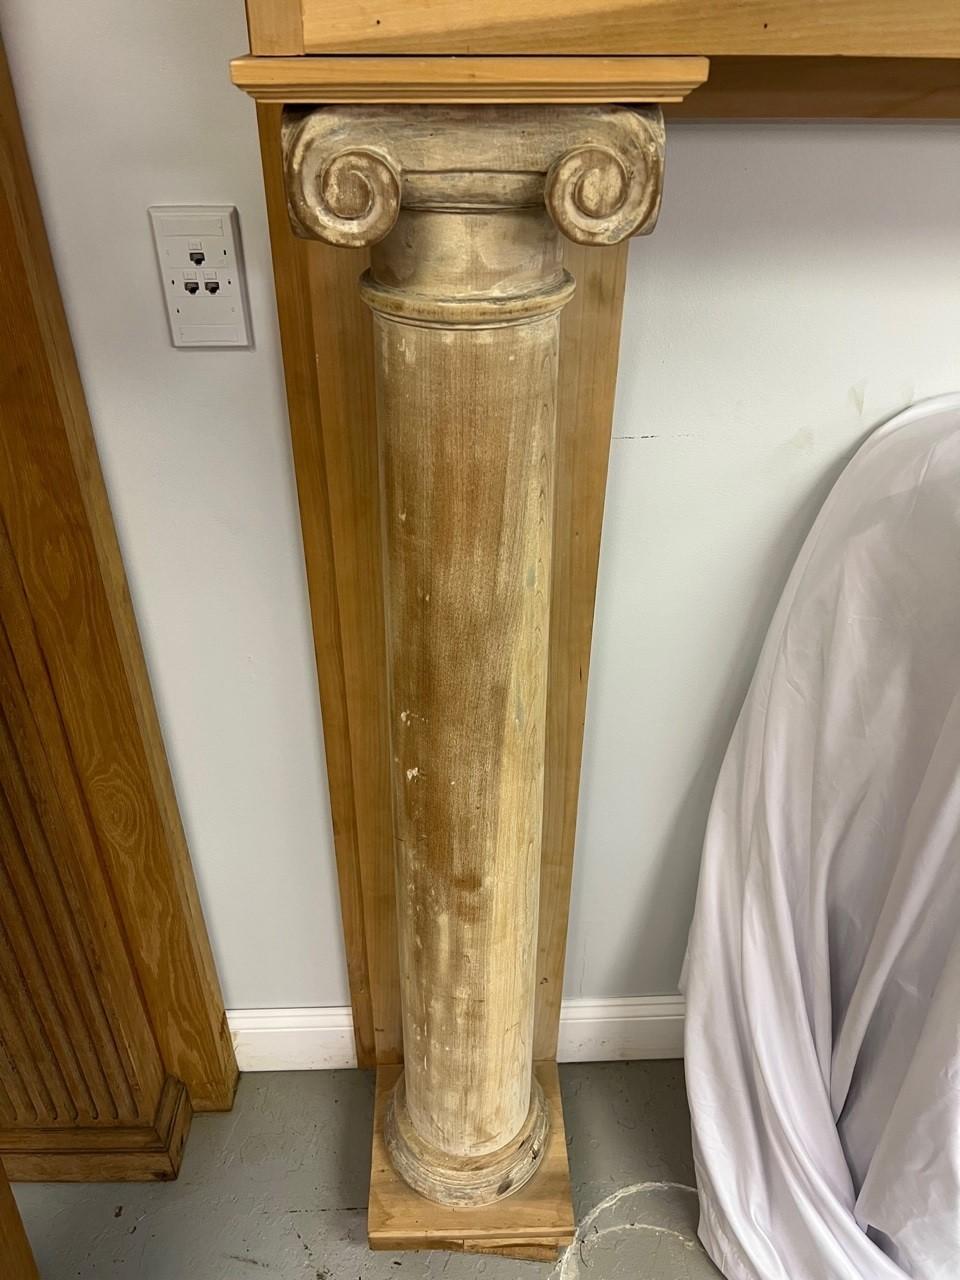 American Vintage Wood Fireplace Mantel with Antique Carvings and Columns with Capitals For Sale